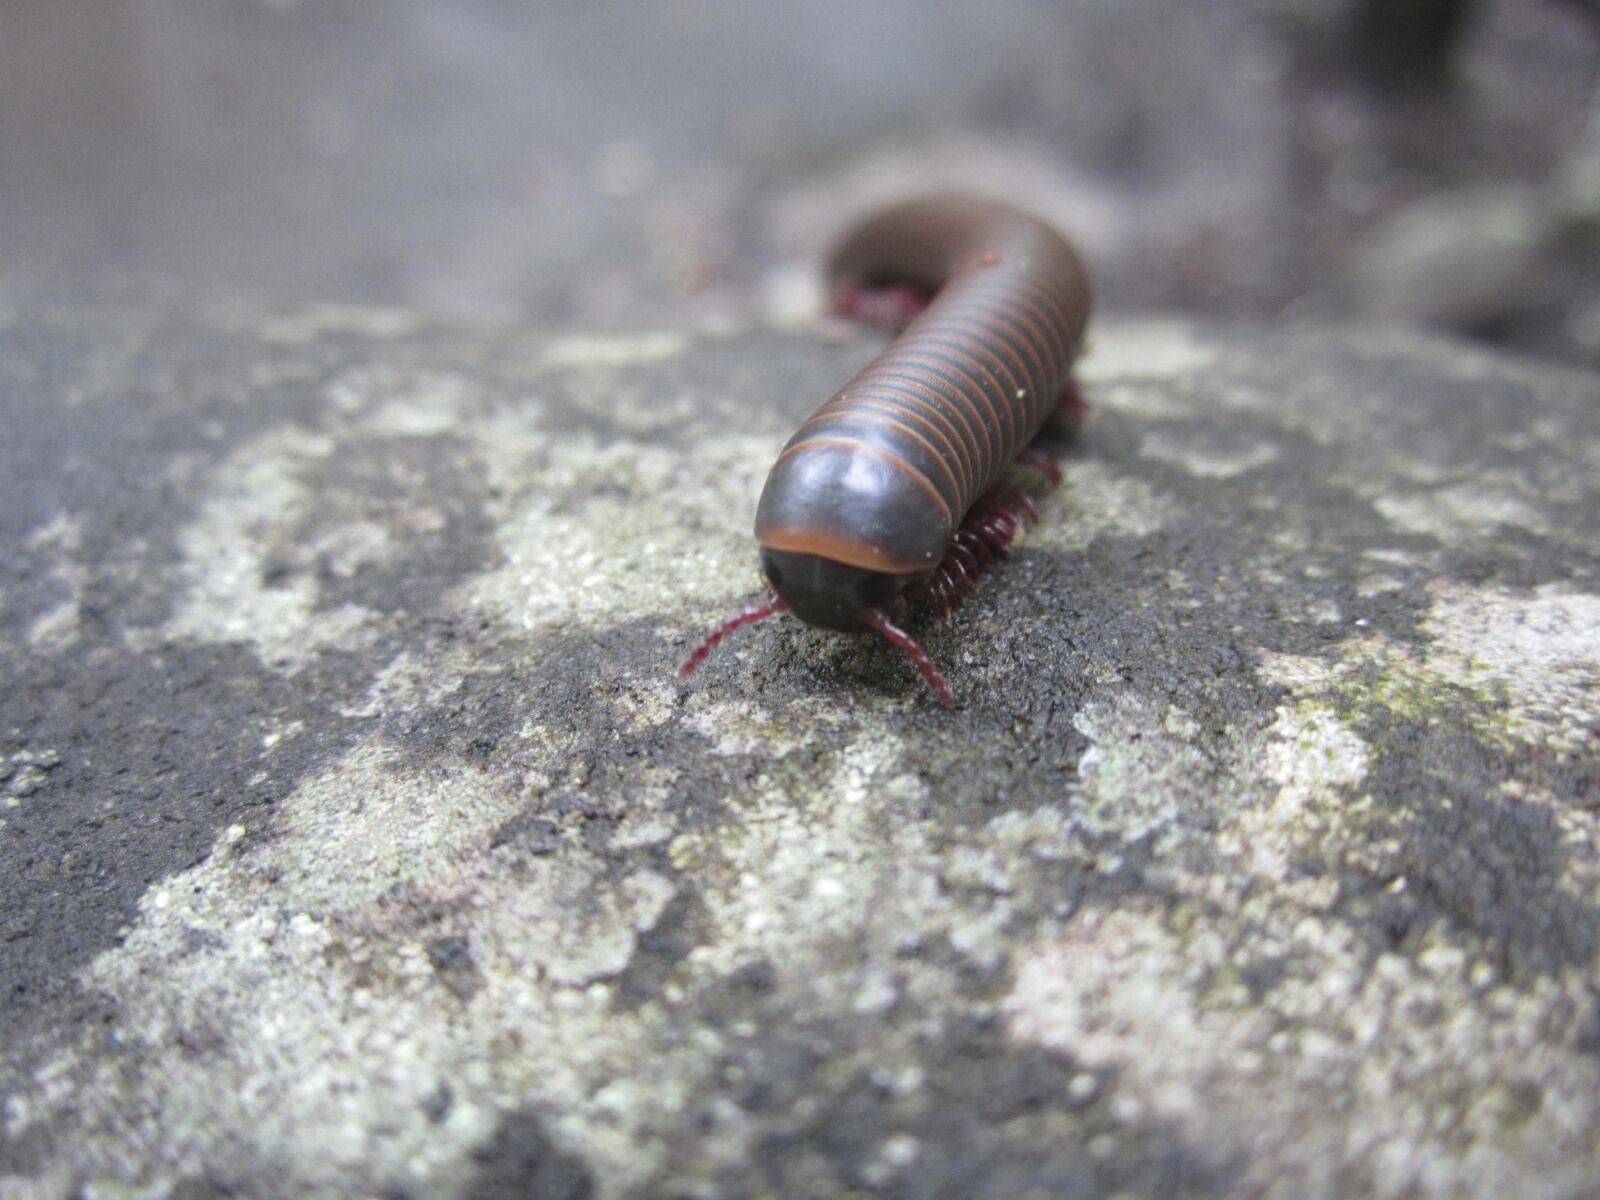 Canon PowerShot ELPH 100 HS (IXUS 115 HS / IXY 210F) sample photo. Insect, millipede, nature photography